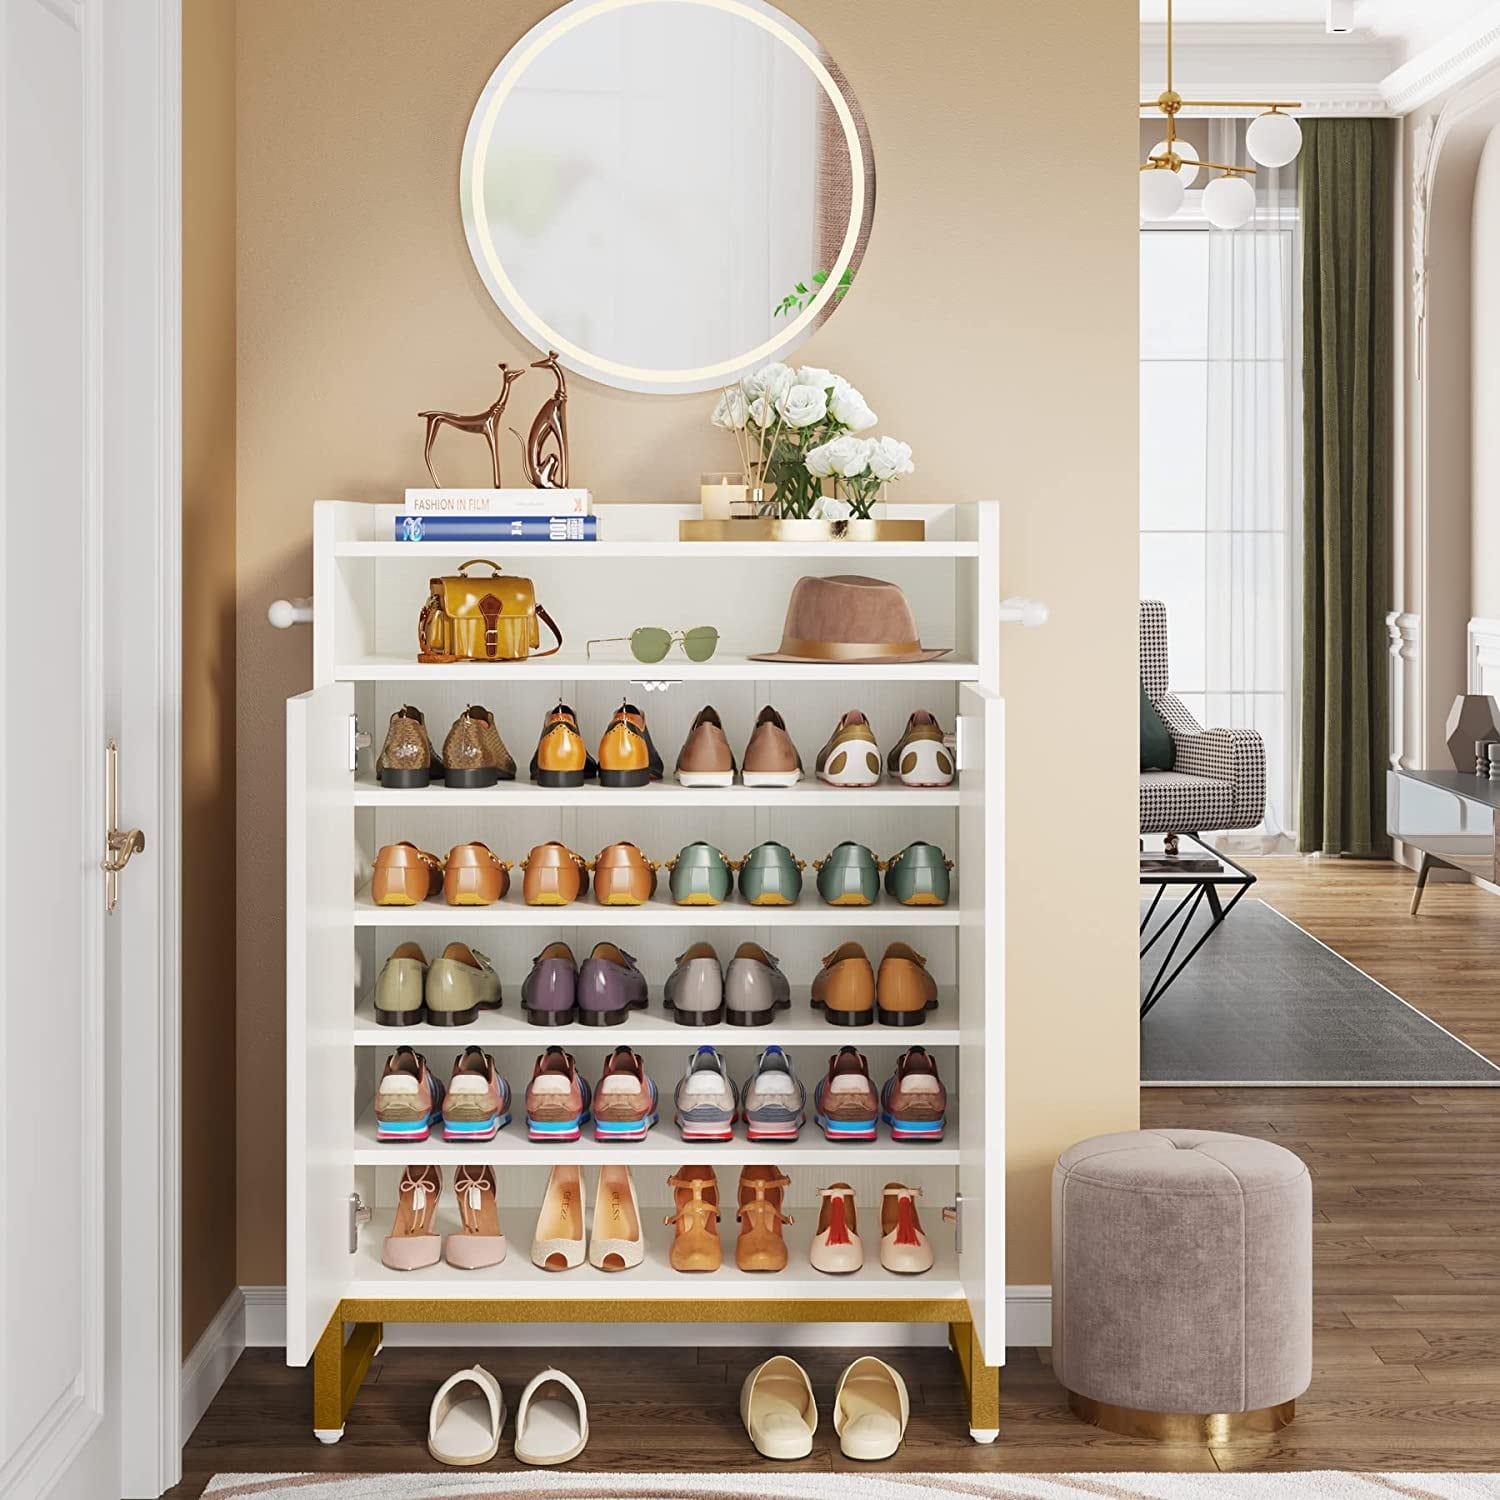 https://ak1.ostkcdn.com/images/products/is/images/direct/4d0c11a55bdd76860cb3157471f5e311207f4fb4/Shoe-Cabinet-5-Tier-Shoe-Storage-Cabinet-with-Open-Shelves-%26-Hooks%2C-Modern-Shoe-Organizer-for-Entryway%2C-Hallway%2C-Bedroom.jpg